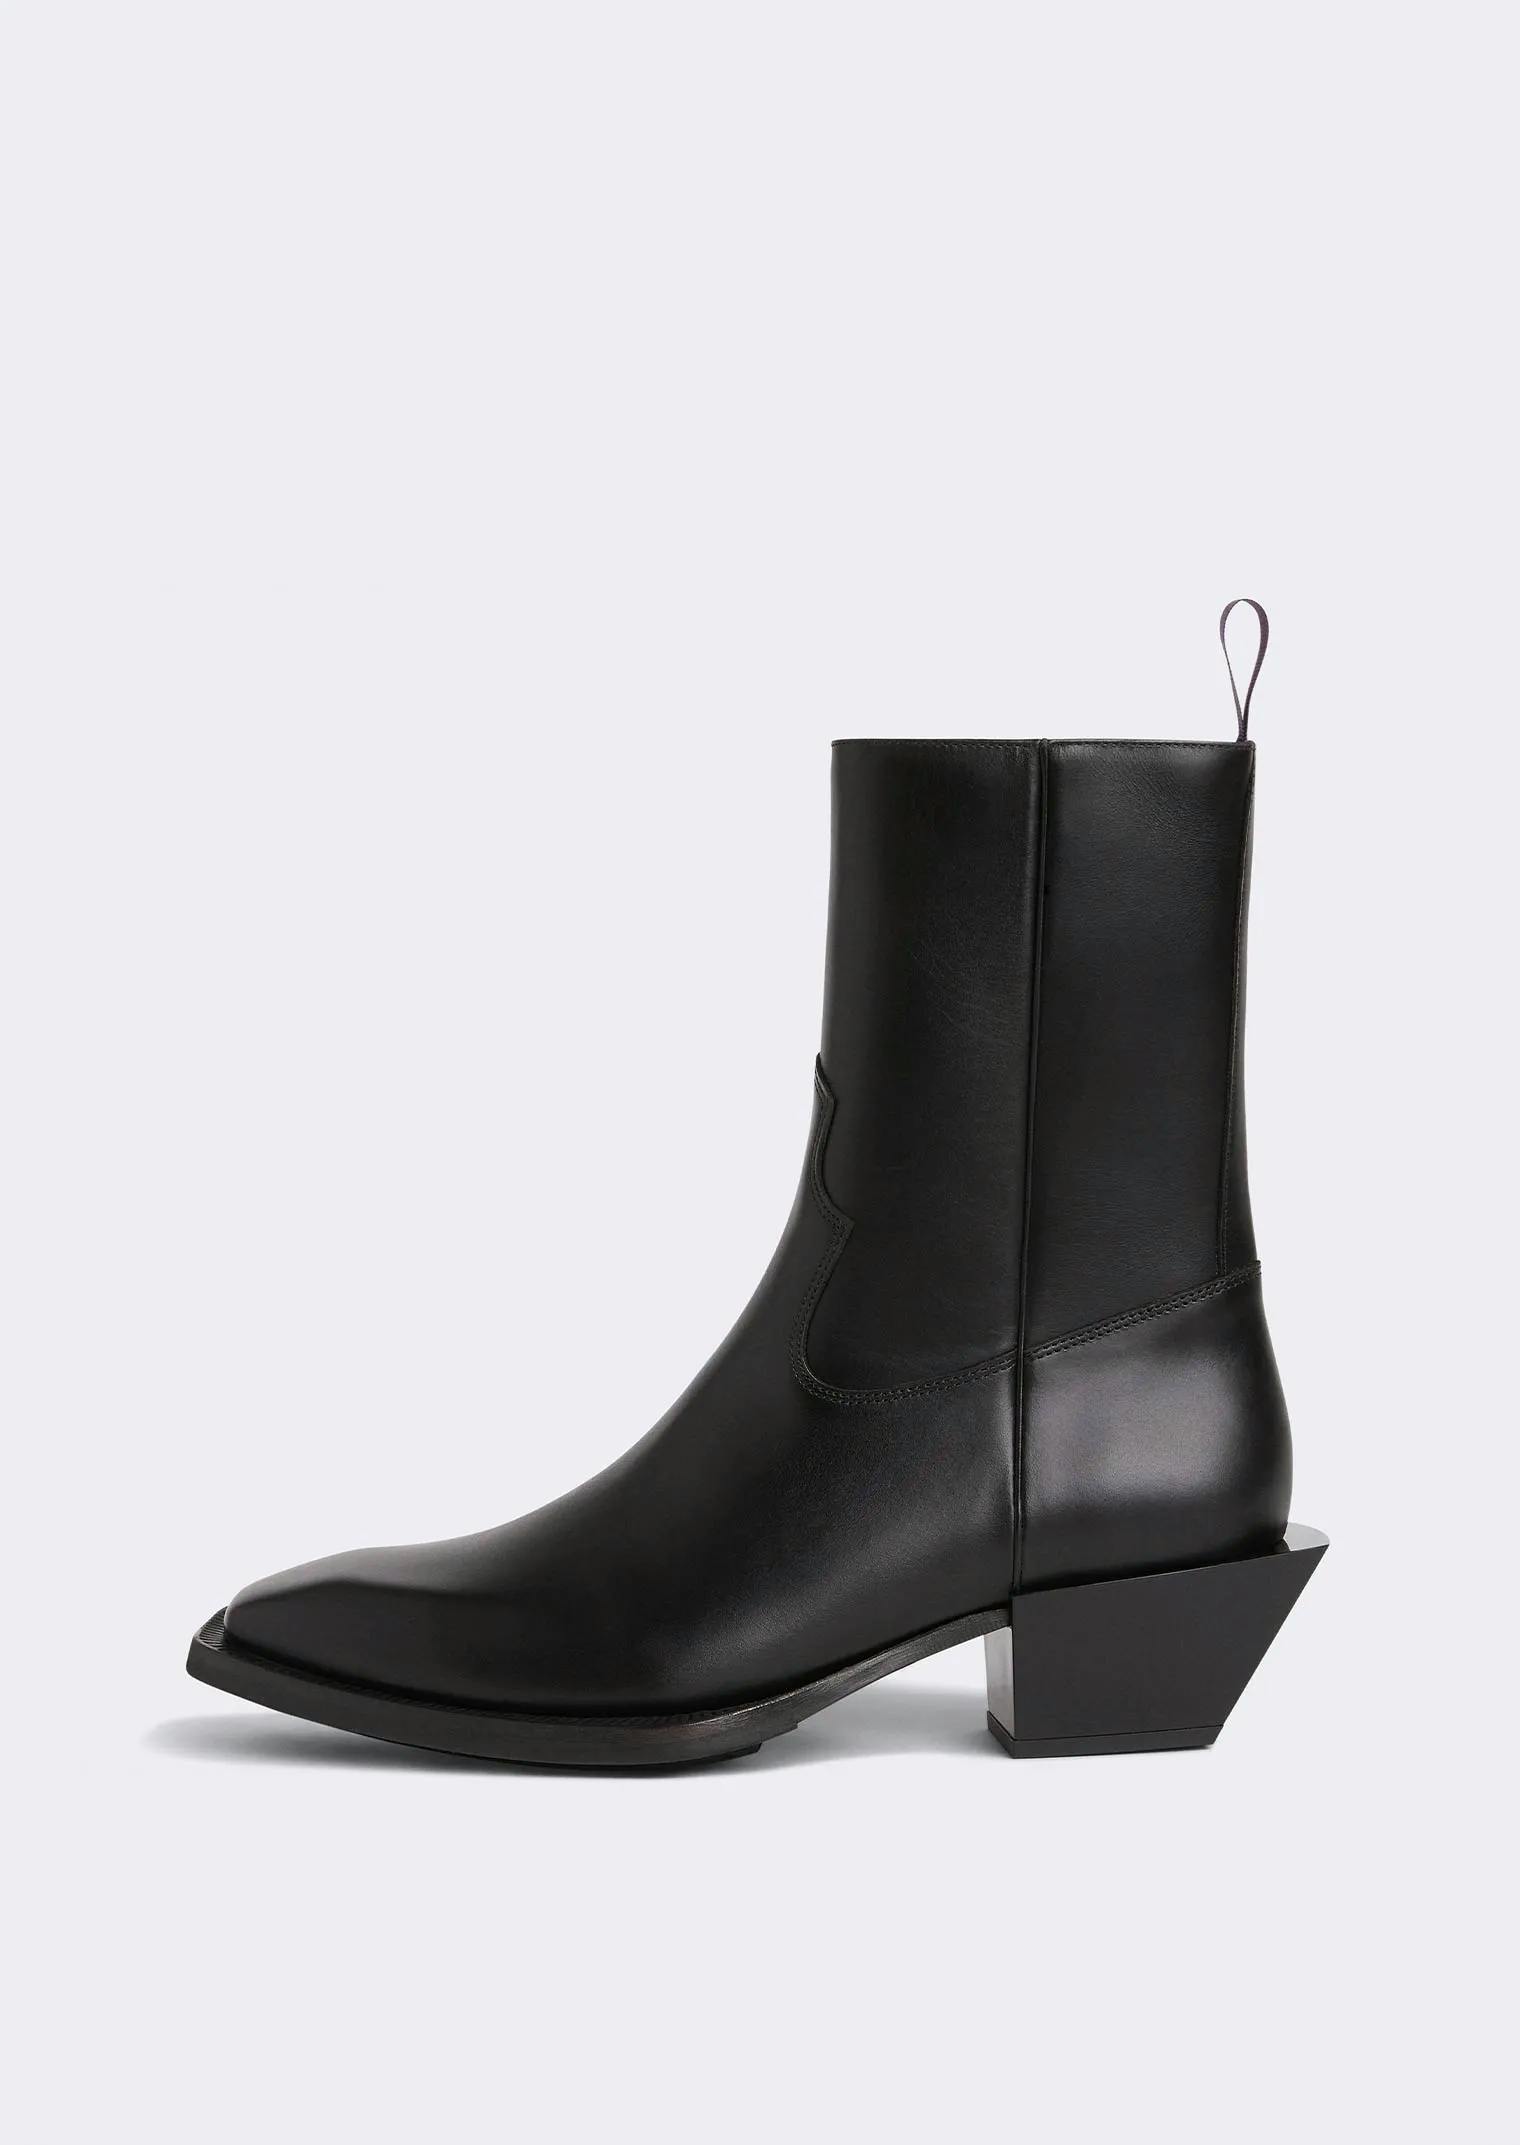 EYTYS Luciano Black Boots